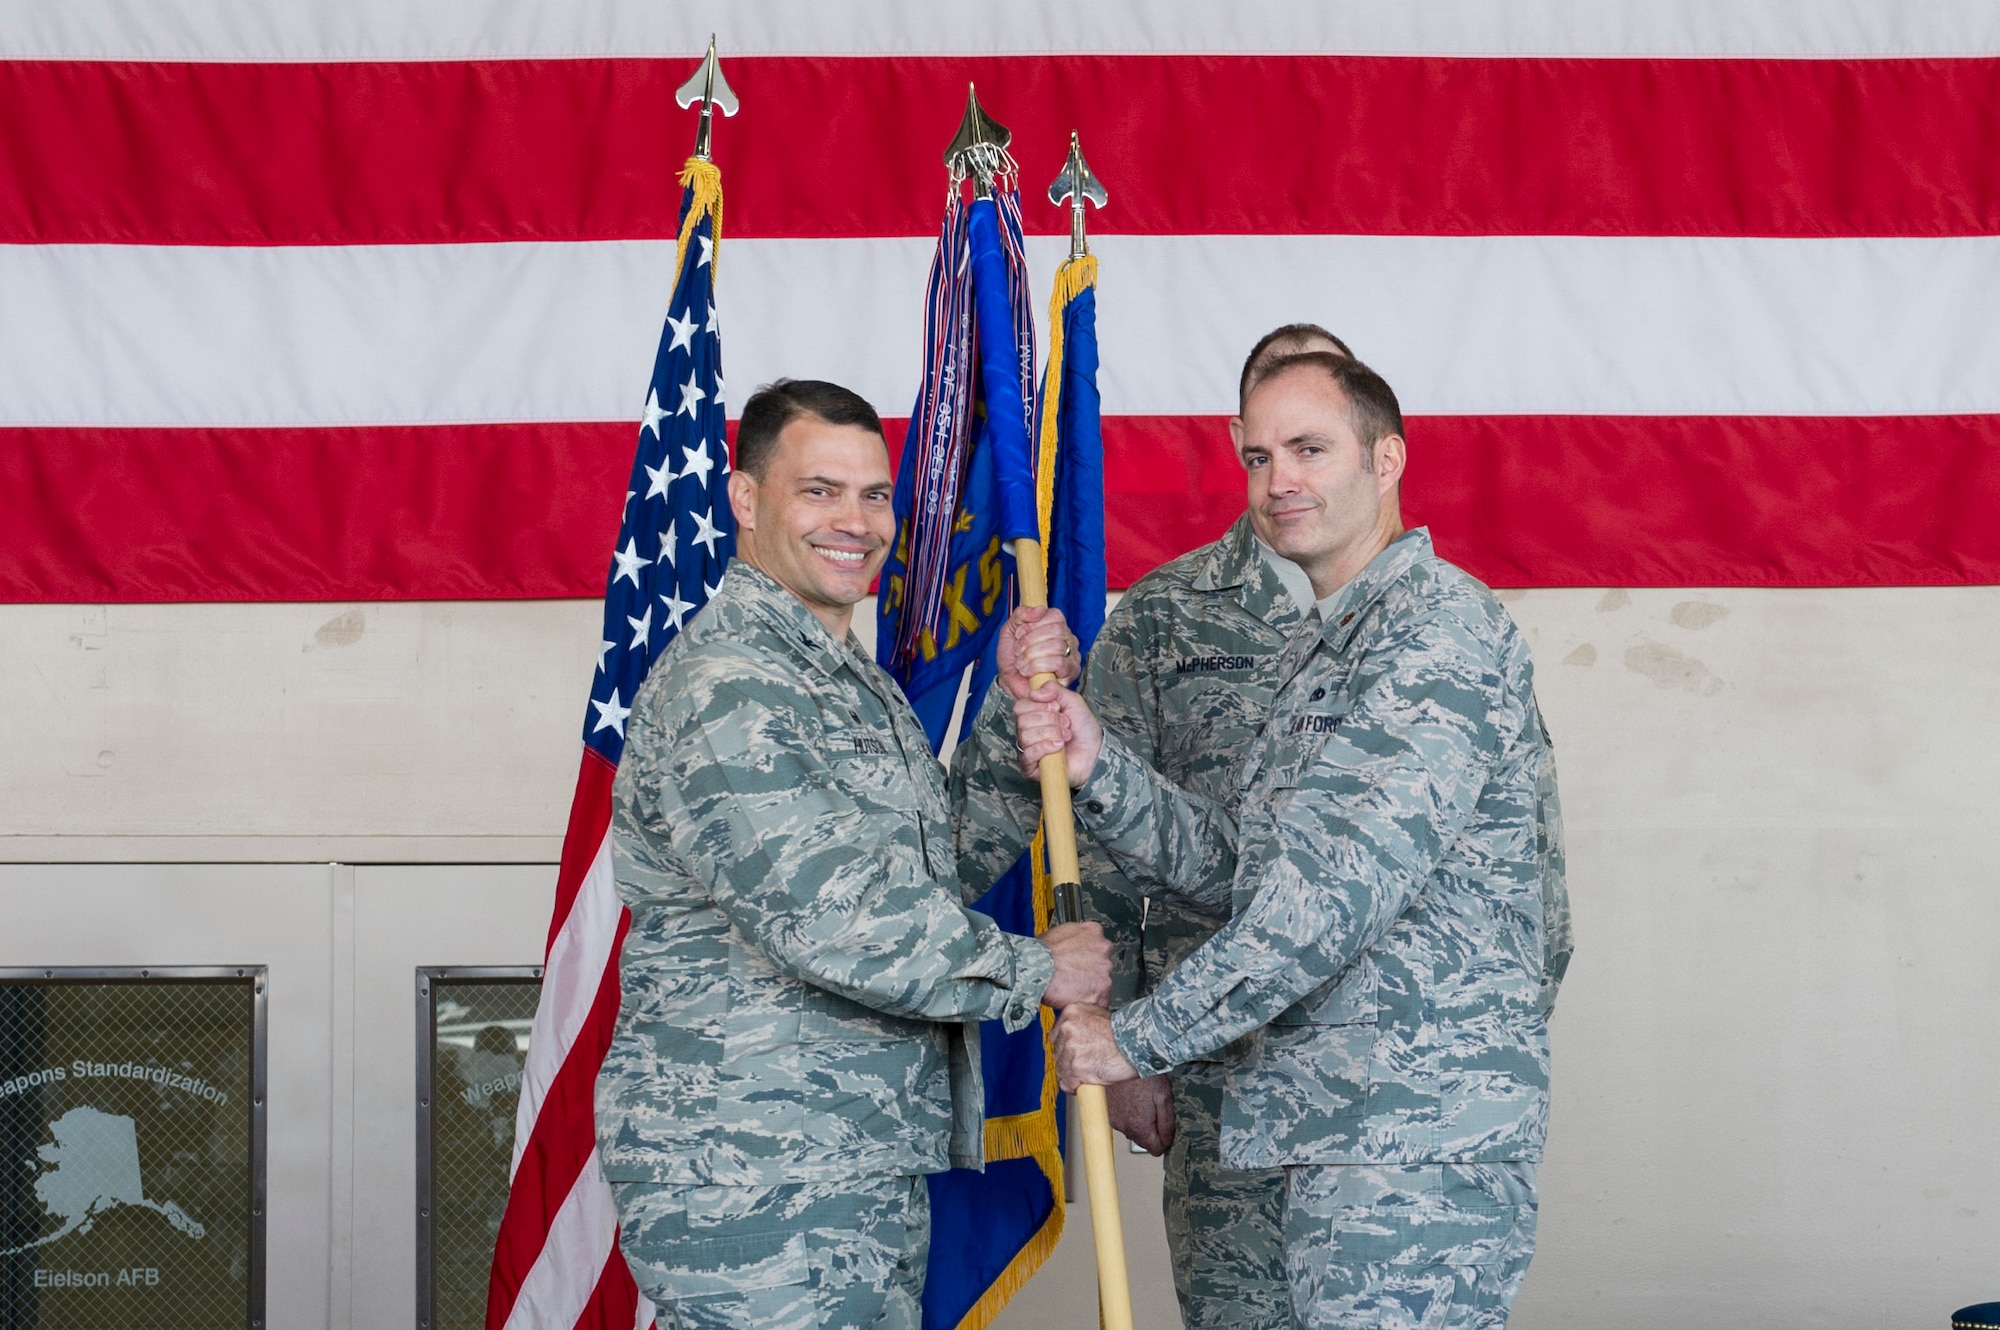 U.S. Air Force Col. Gregory Hutson, the 354th Maintenance Group commander, passes the 354th Maintenance Squadron, MXS guidon to Maj. Daniel Kline, the new 354th MXS commander, May 30, 2017, at Eielson Air Force Base, Alaska. Kline, took command from Maj. Timothy Stokes, who will serve as the 361st Training Squadron commander at Sheppard Air Force Base, Texas. (U.S. Air Force photo by Airman 1st Class Isaac Johnson)